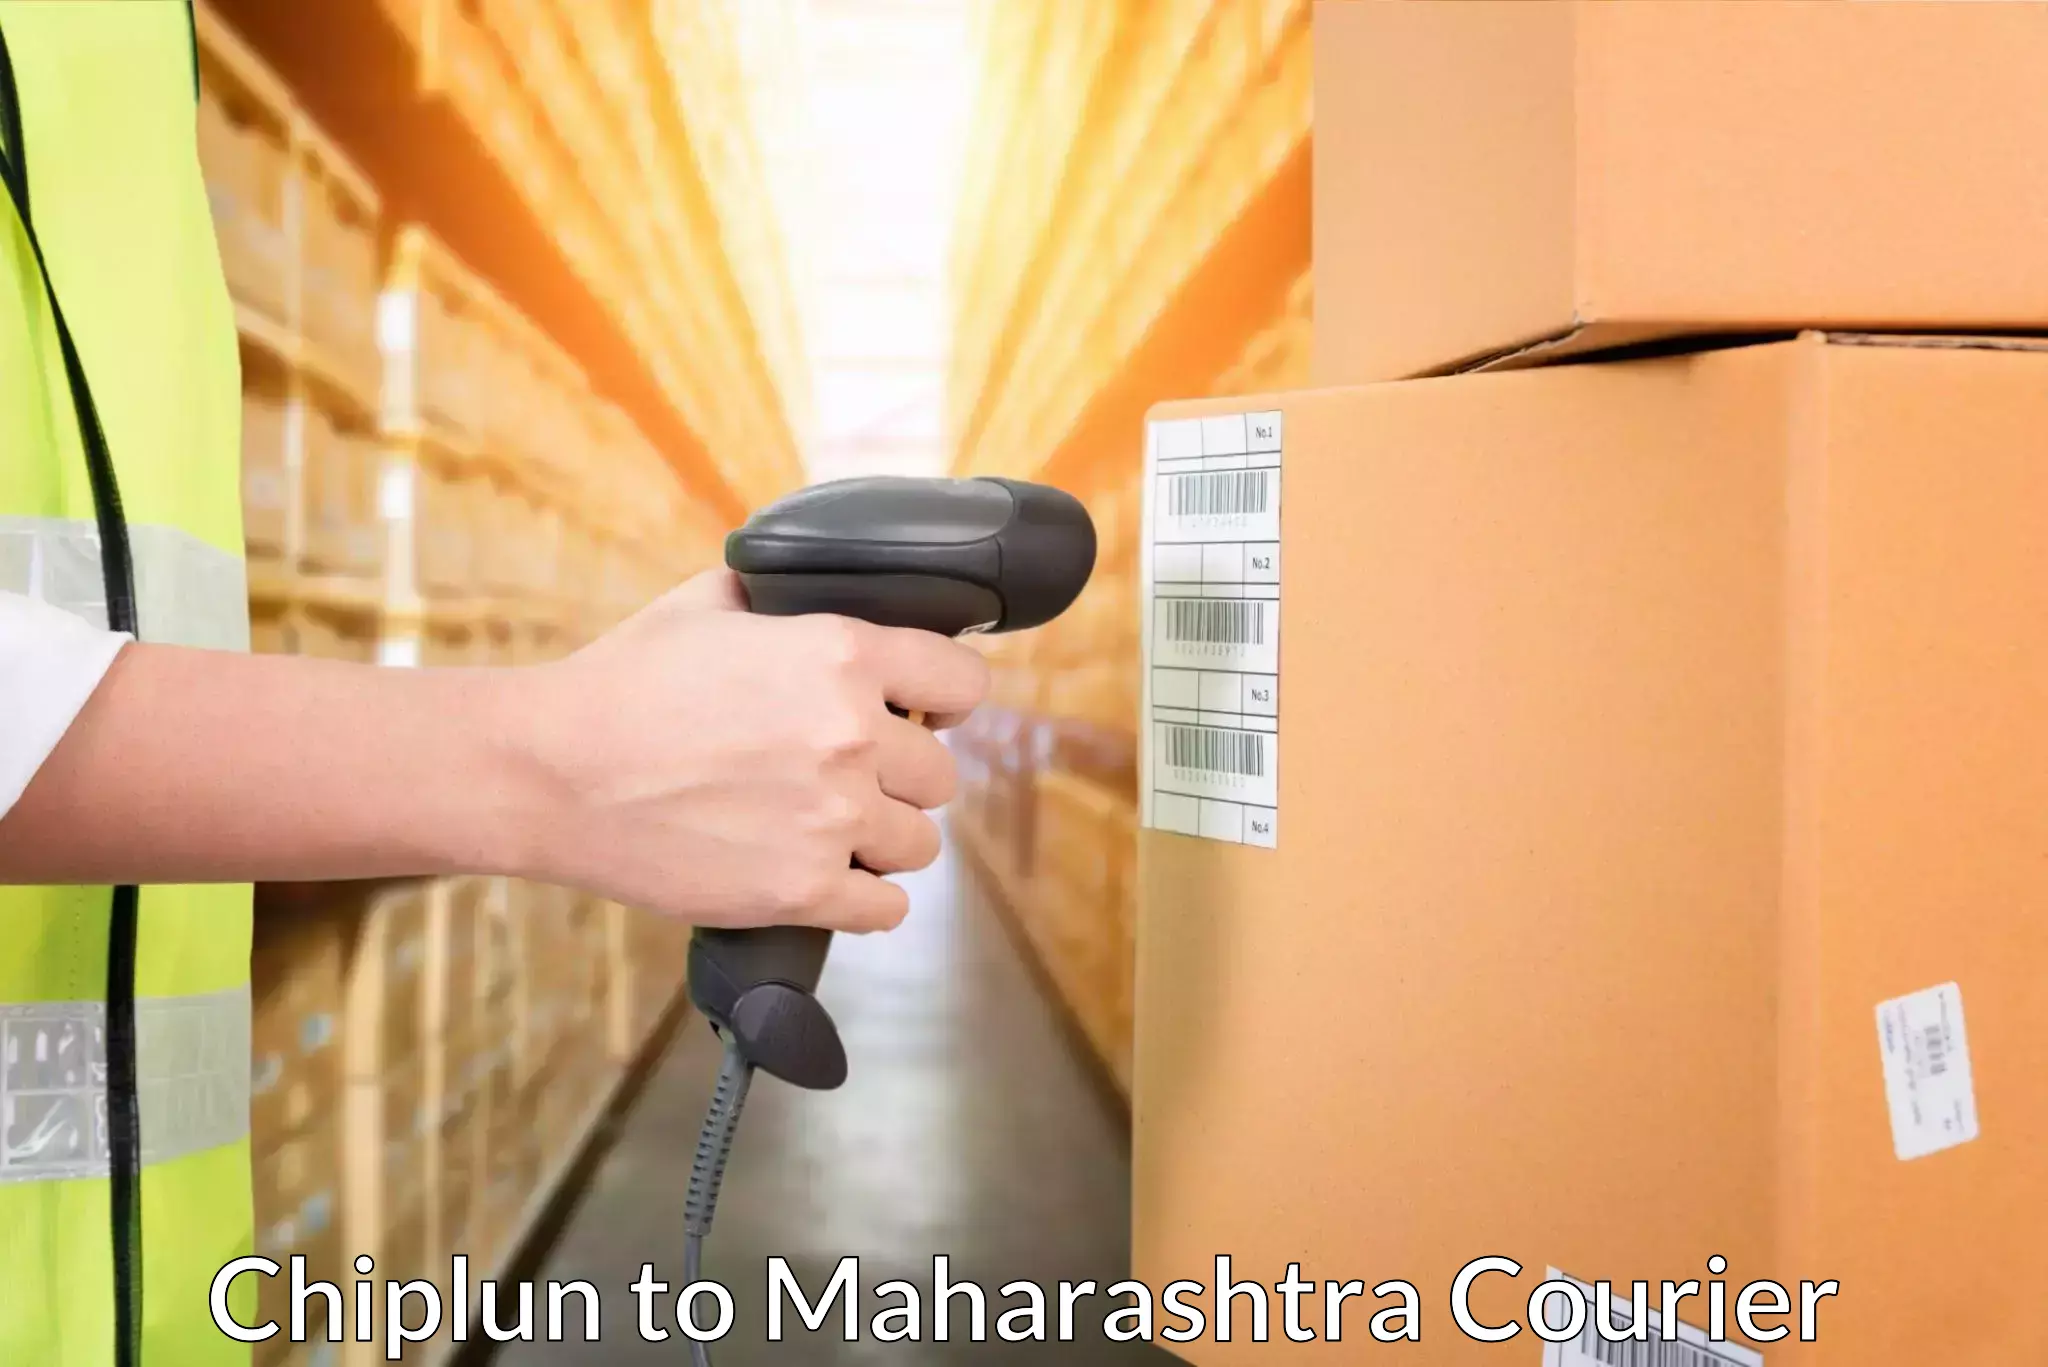 Global shipping networks Chiplun to Shirala